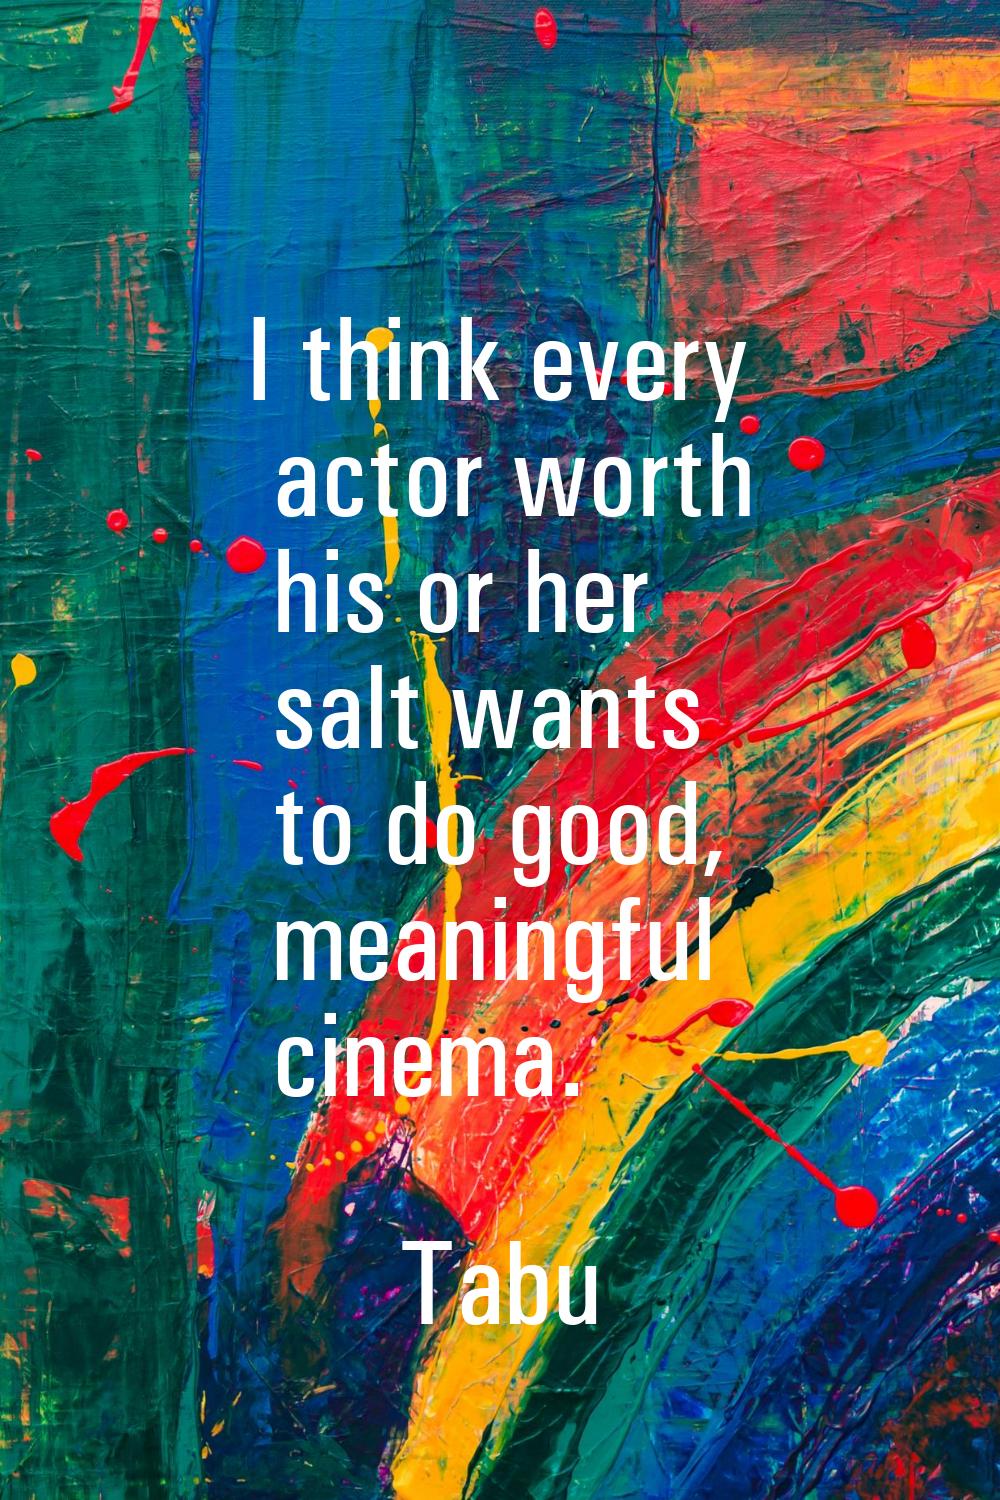 I think every actor worth his or her salt wants to do good, meaningful cinema.